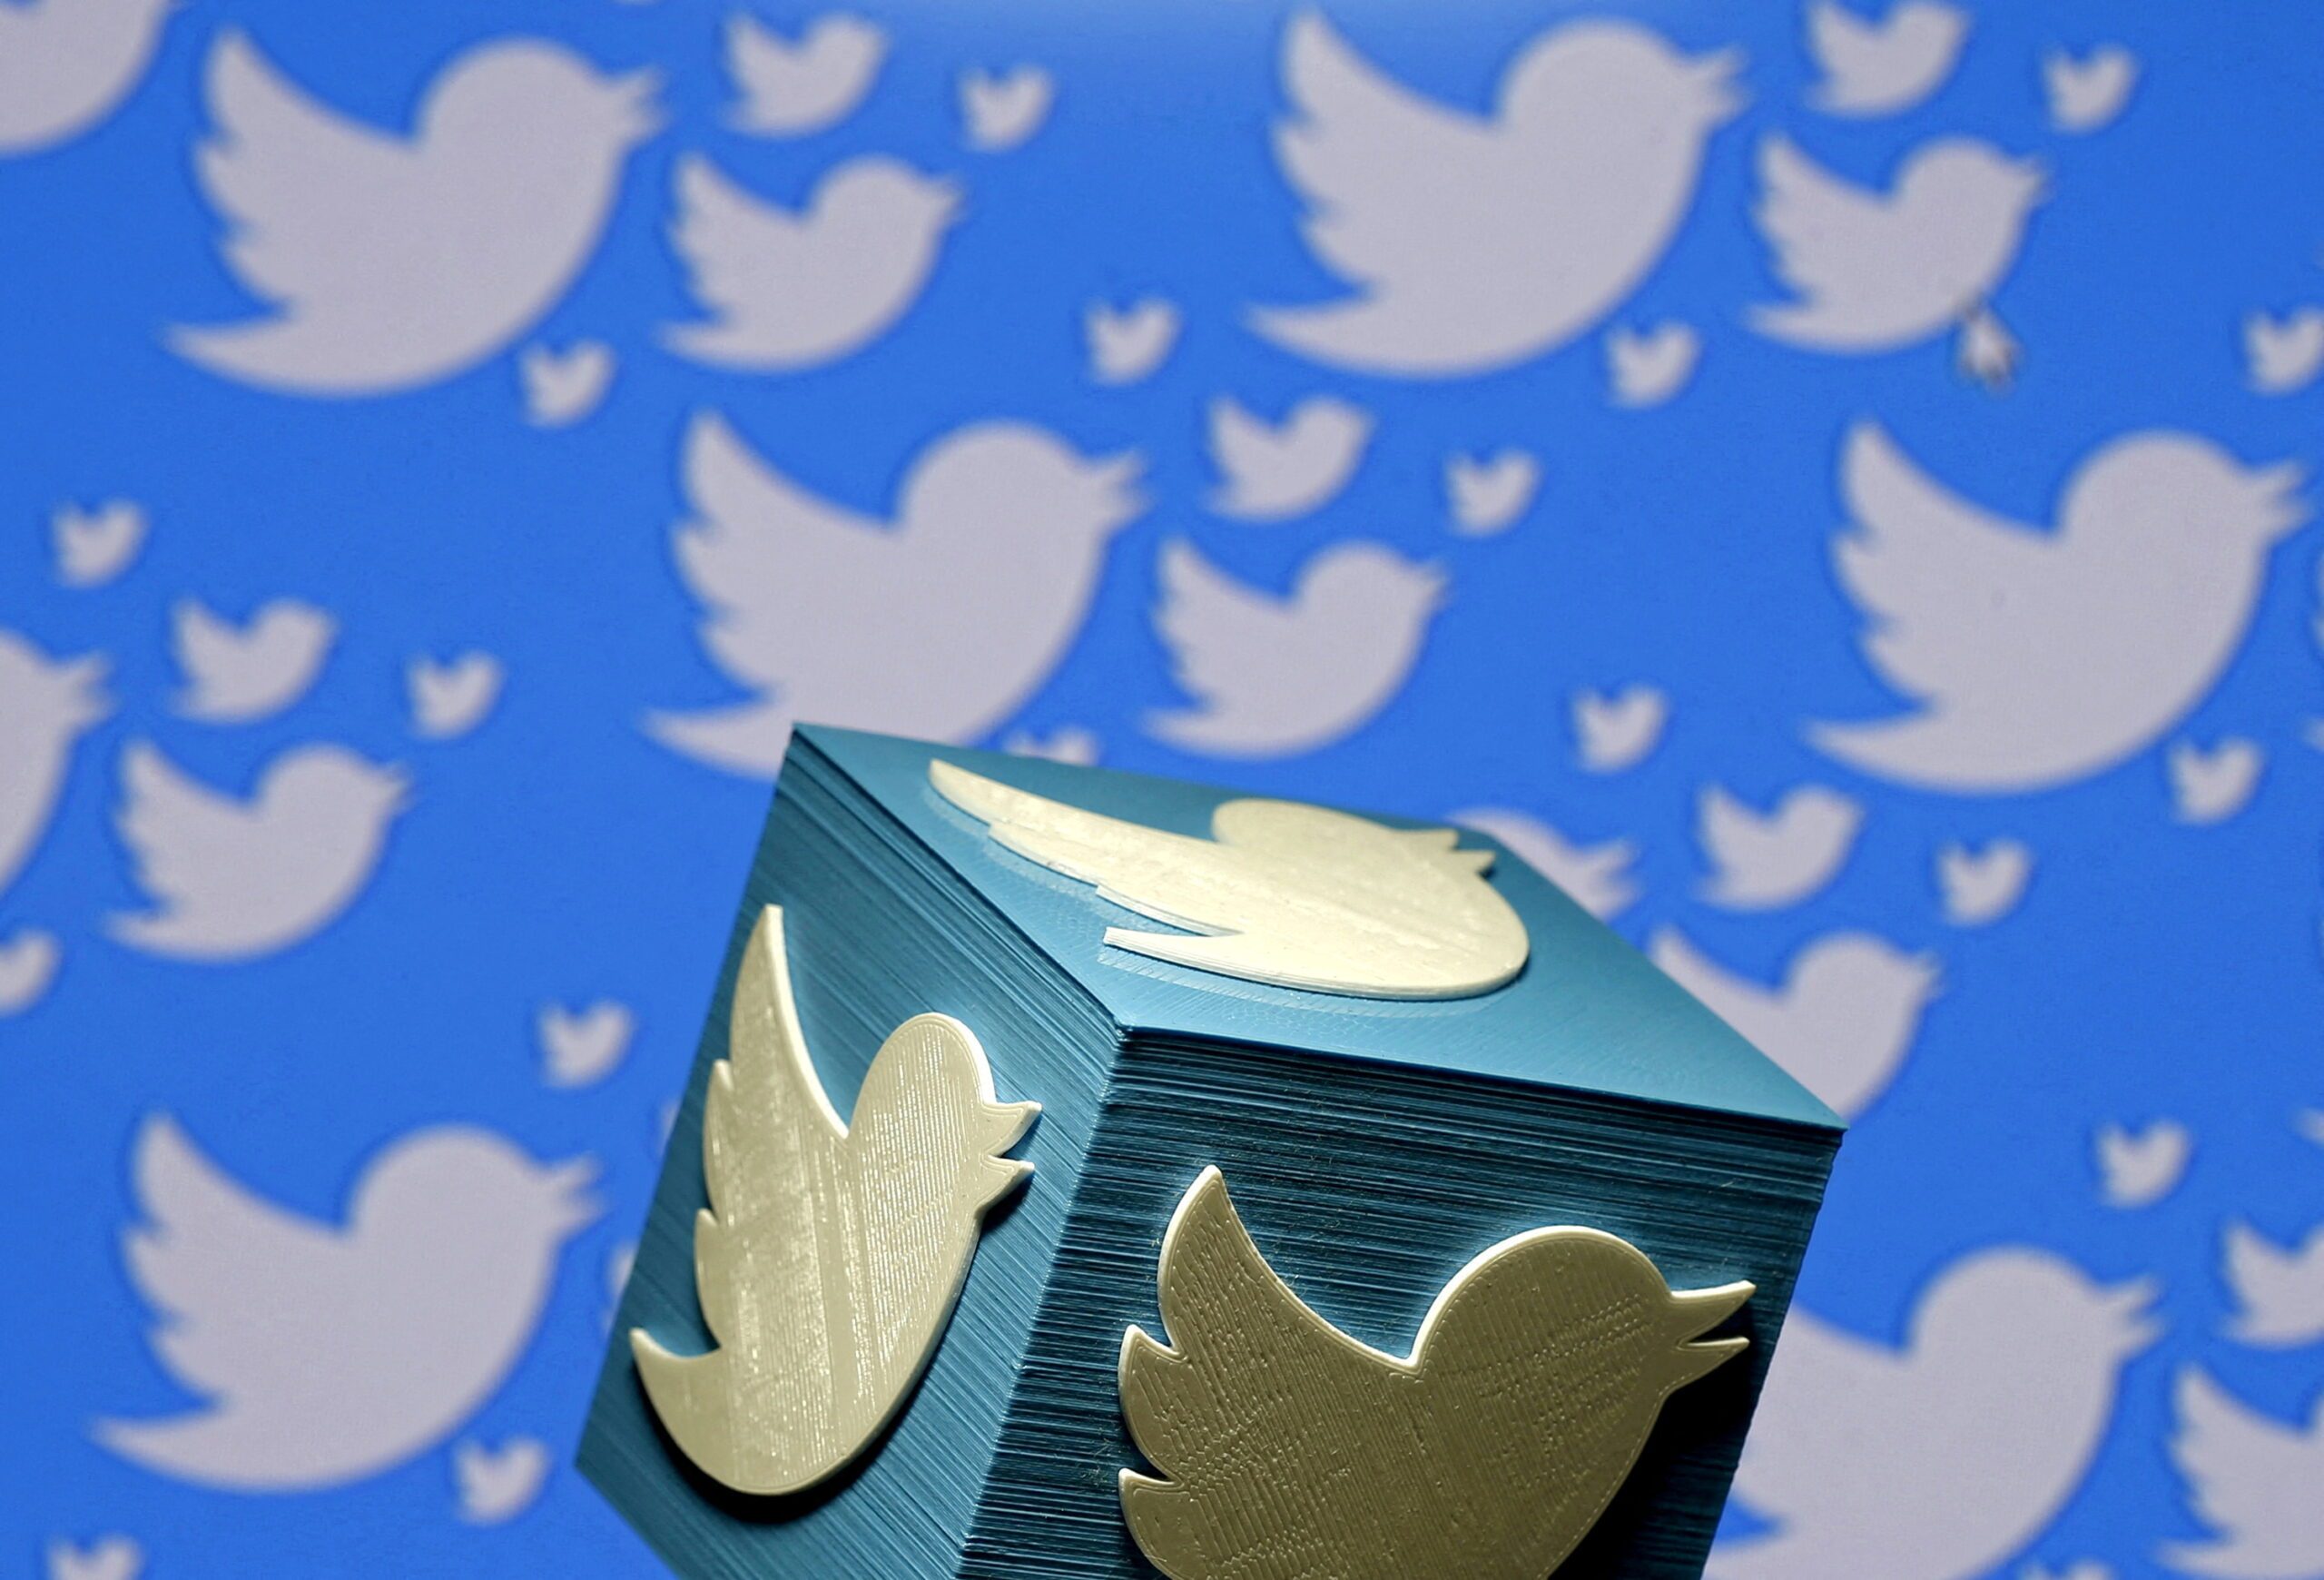 Twitter estimates spam, fake accounts comprise less than 5% of users – filing